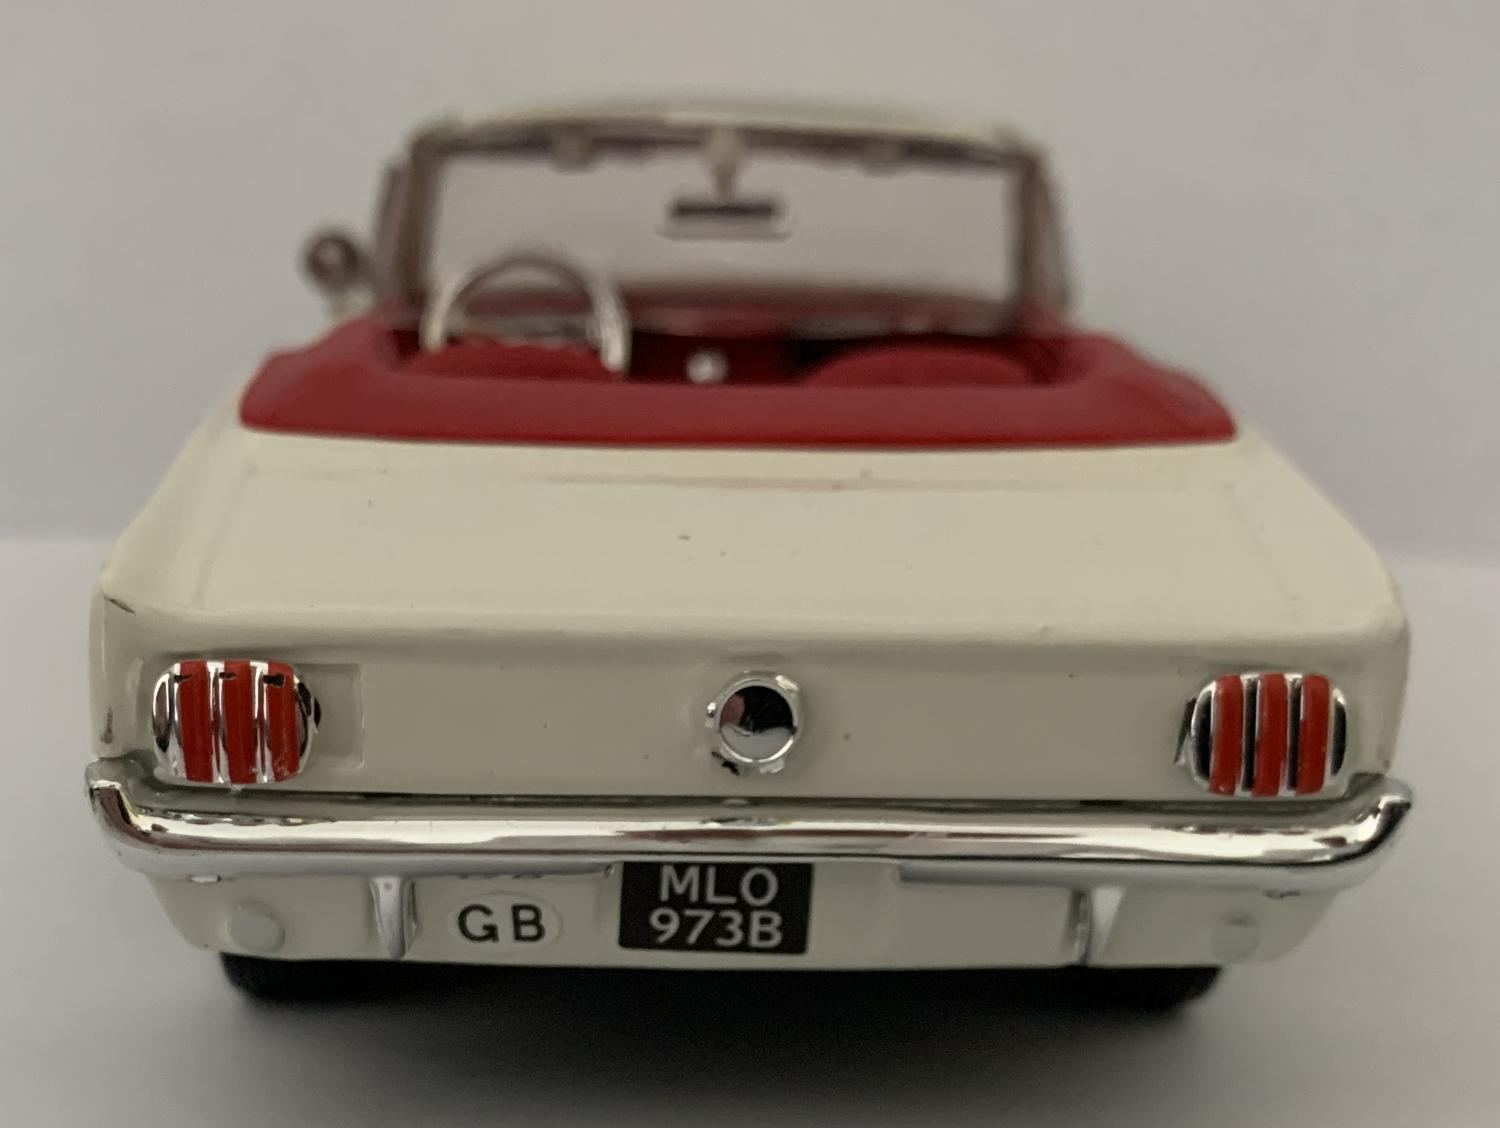 A good reproduction of the Ford Mustang ½ with detail throughout, all authentically recreated.  The model is presented James Bond 007 60 Years of Bond window display box, the car is approx. 19 cm long and the presentation box is 24.5 cmcA good reproduction of the Ford Mustang ½ with detail throughout, all authentically recreated.  The model is presented James Bond 007 60 Years of Bond window display box, the car is approx. 19 cm long and the presentation box is 24.5 cm